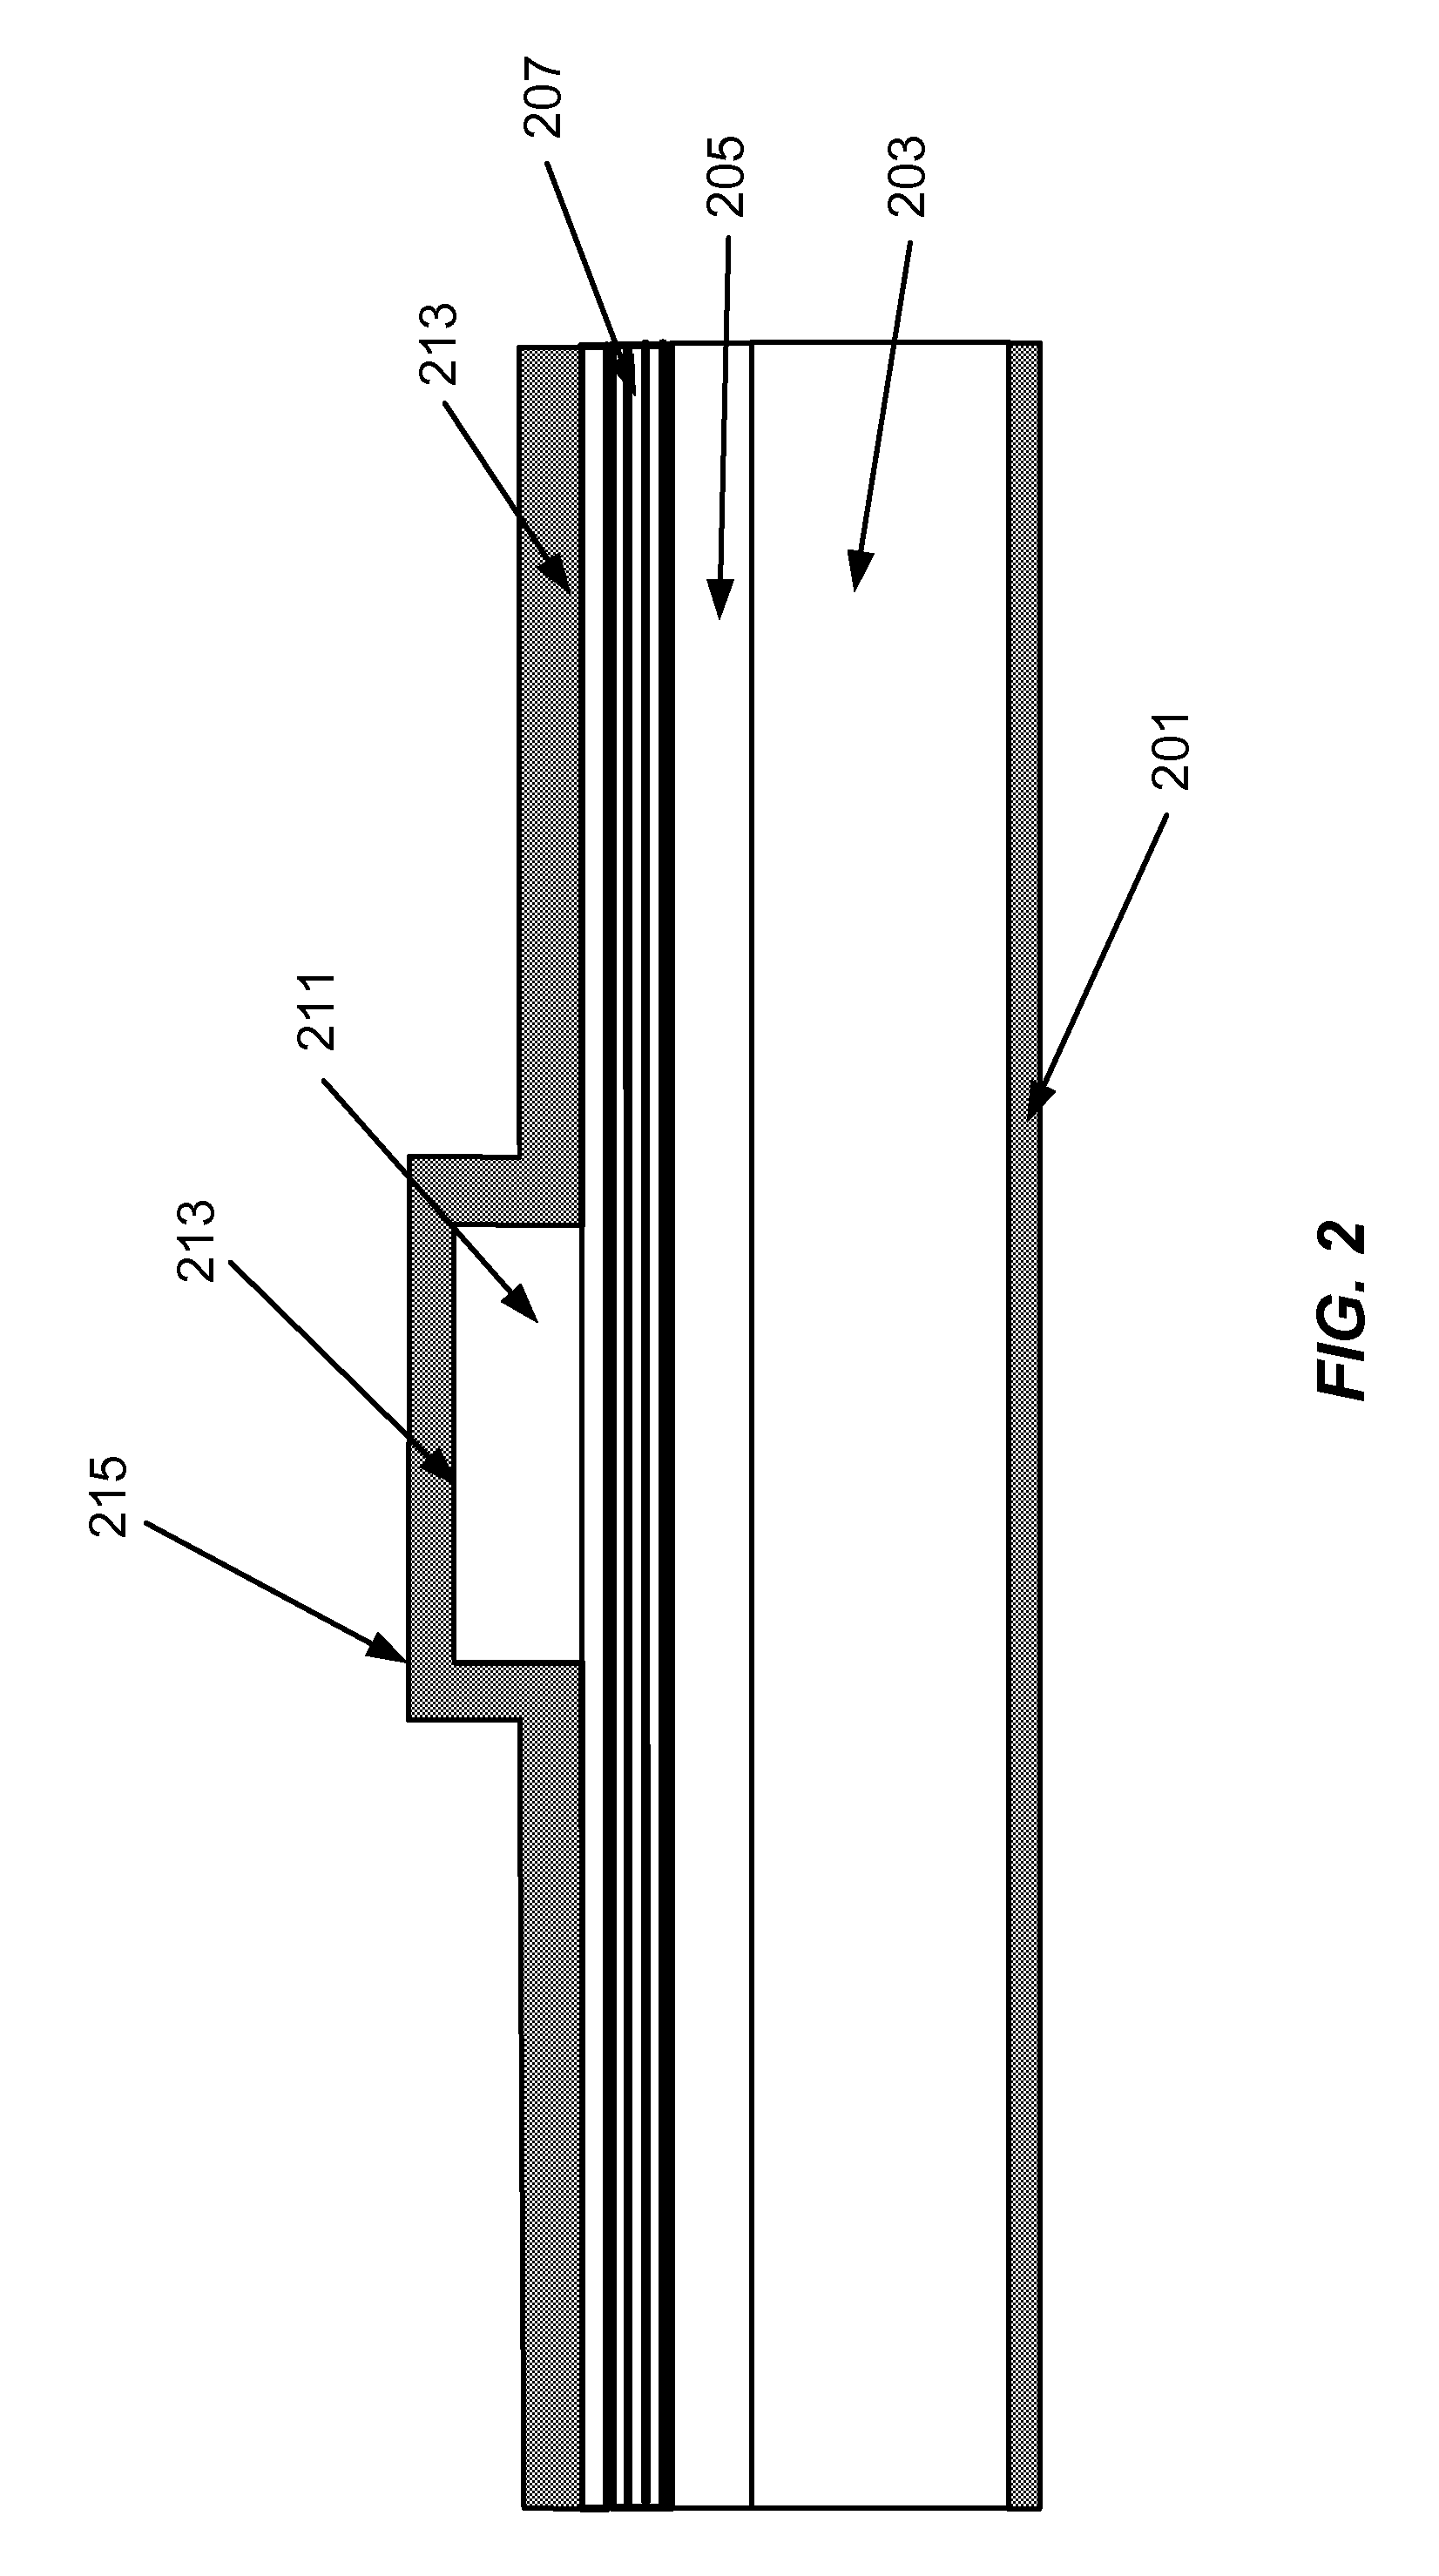 Laser Package Having Multiple Emitters Configured on a Substrate Member